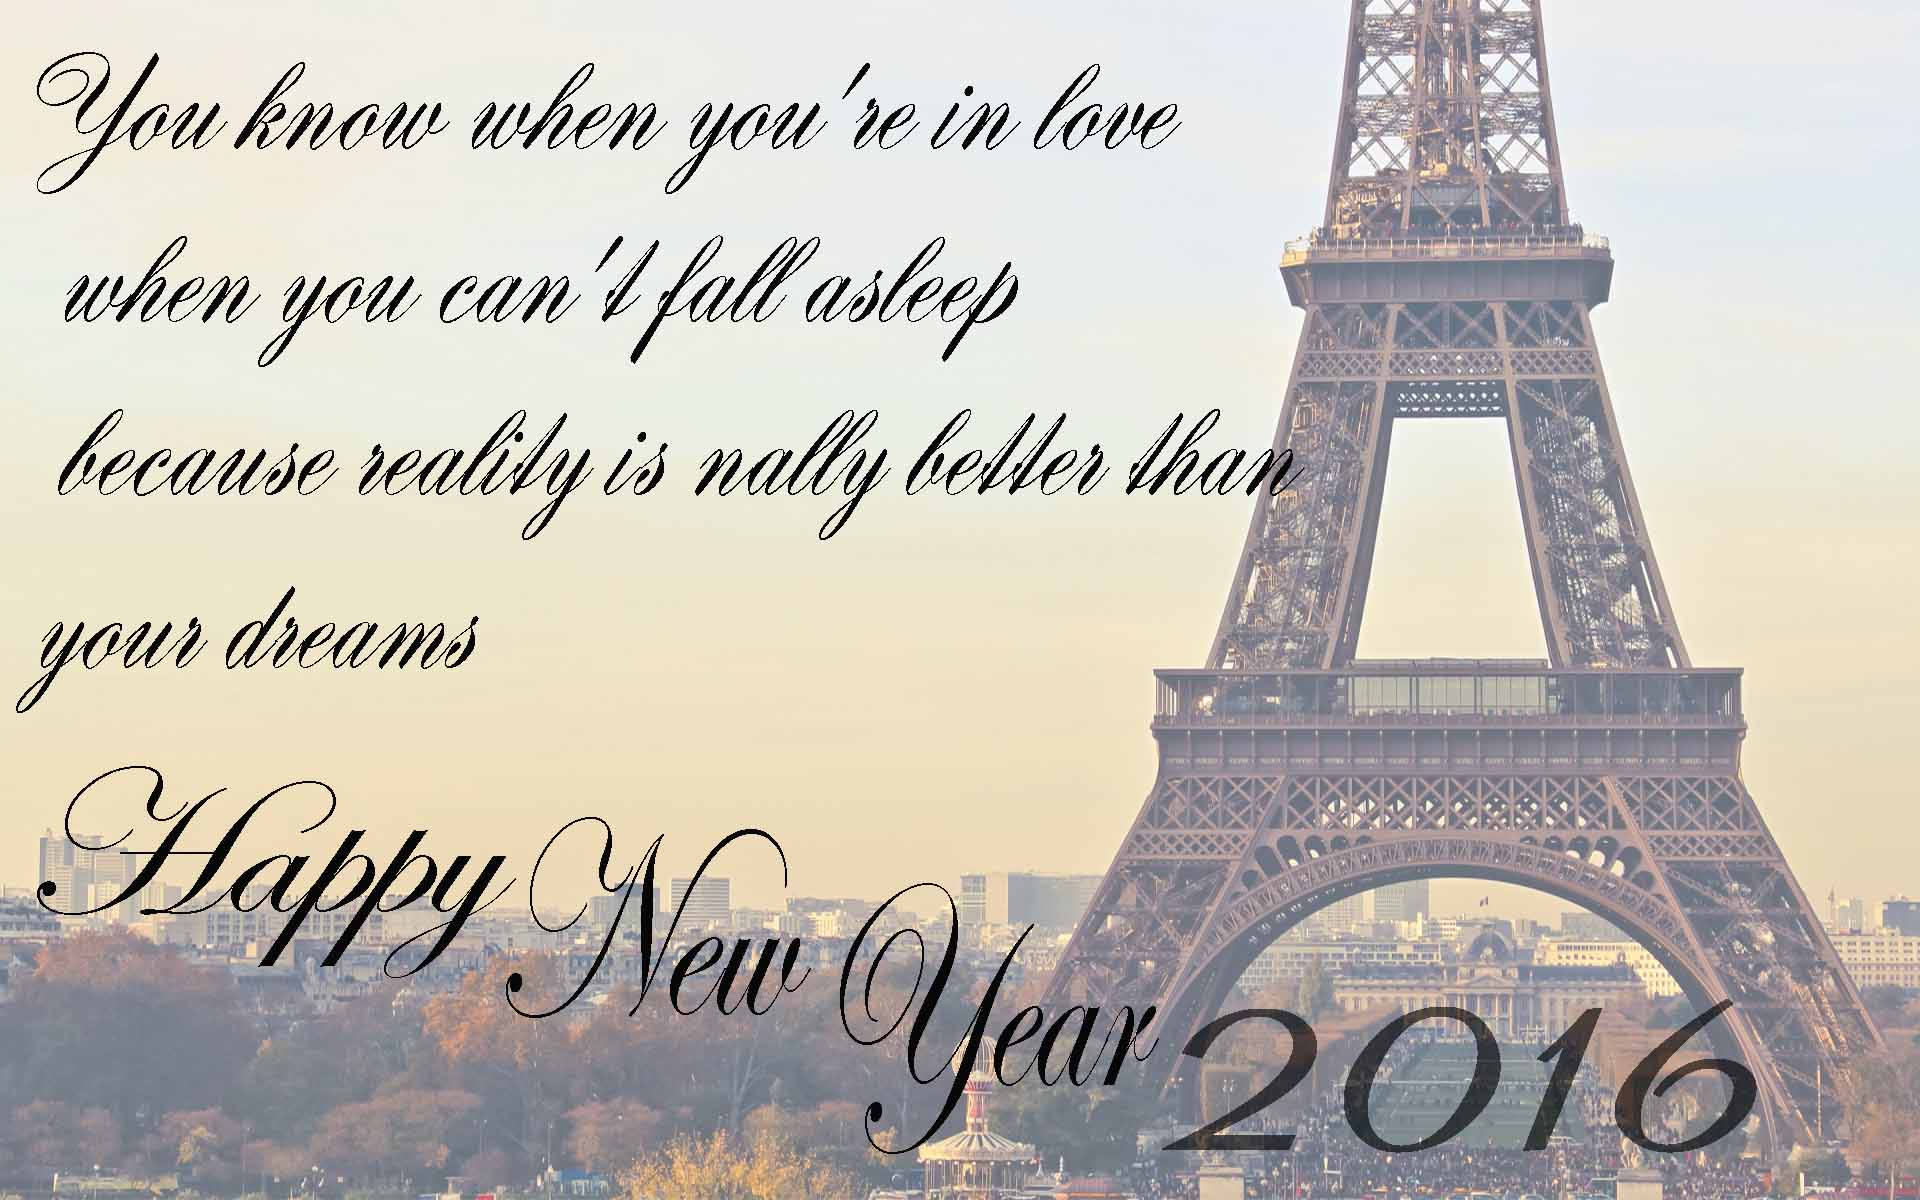 Happy New Year 2016 Wishes for lovers. Happy New Year 2016 SMS